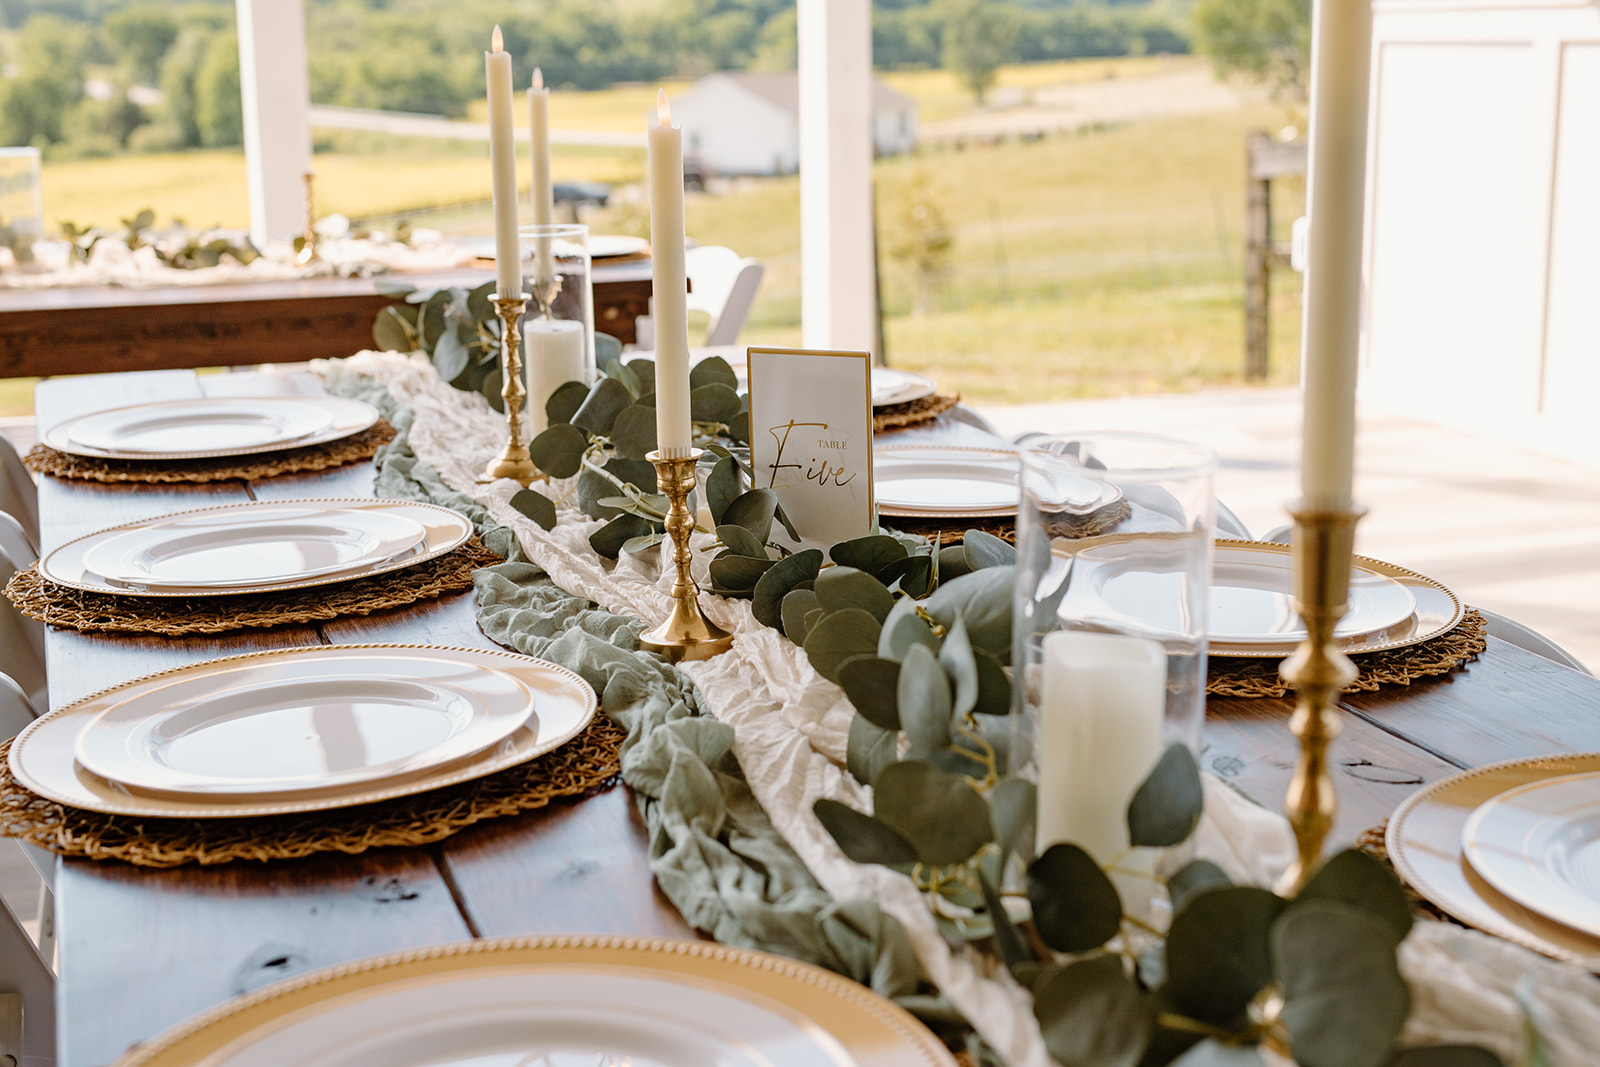 Classic Neutral Wedding Colors Made This Barn Wedding Pop with Beauty